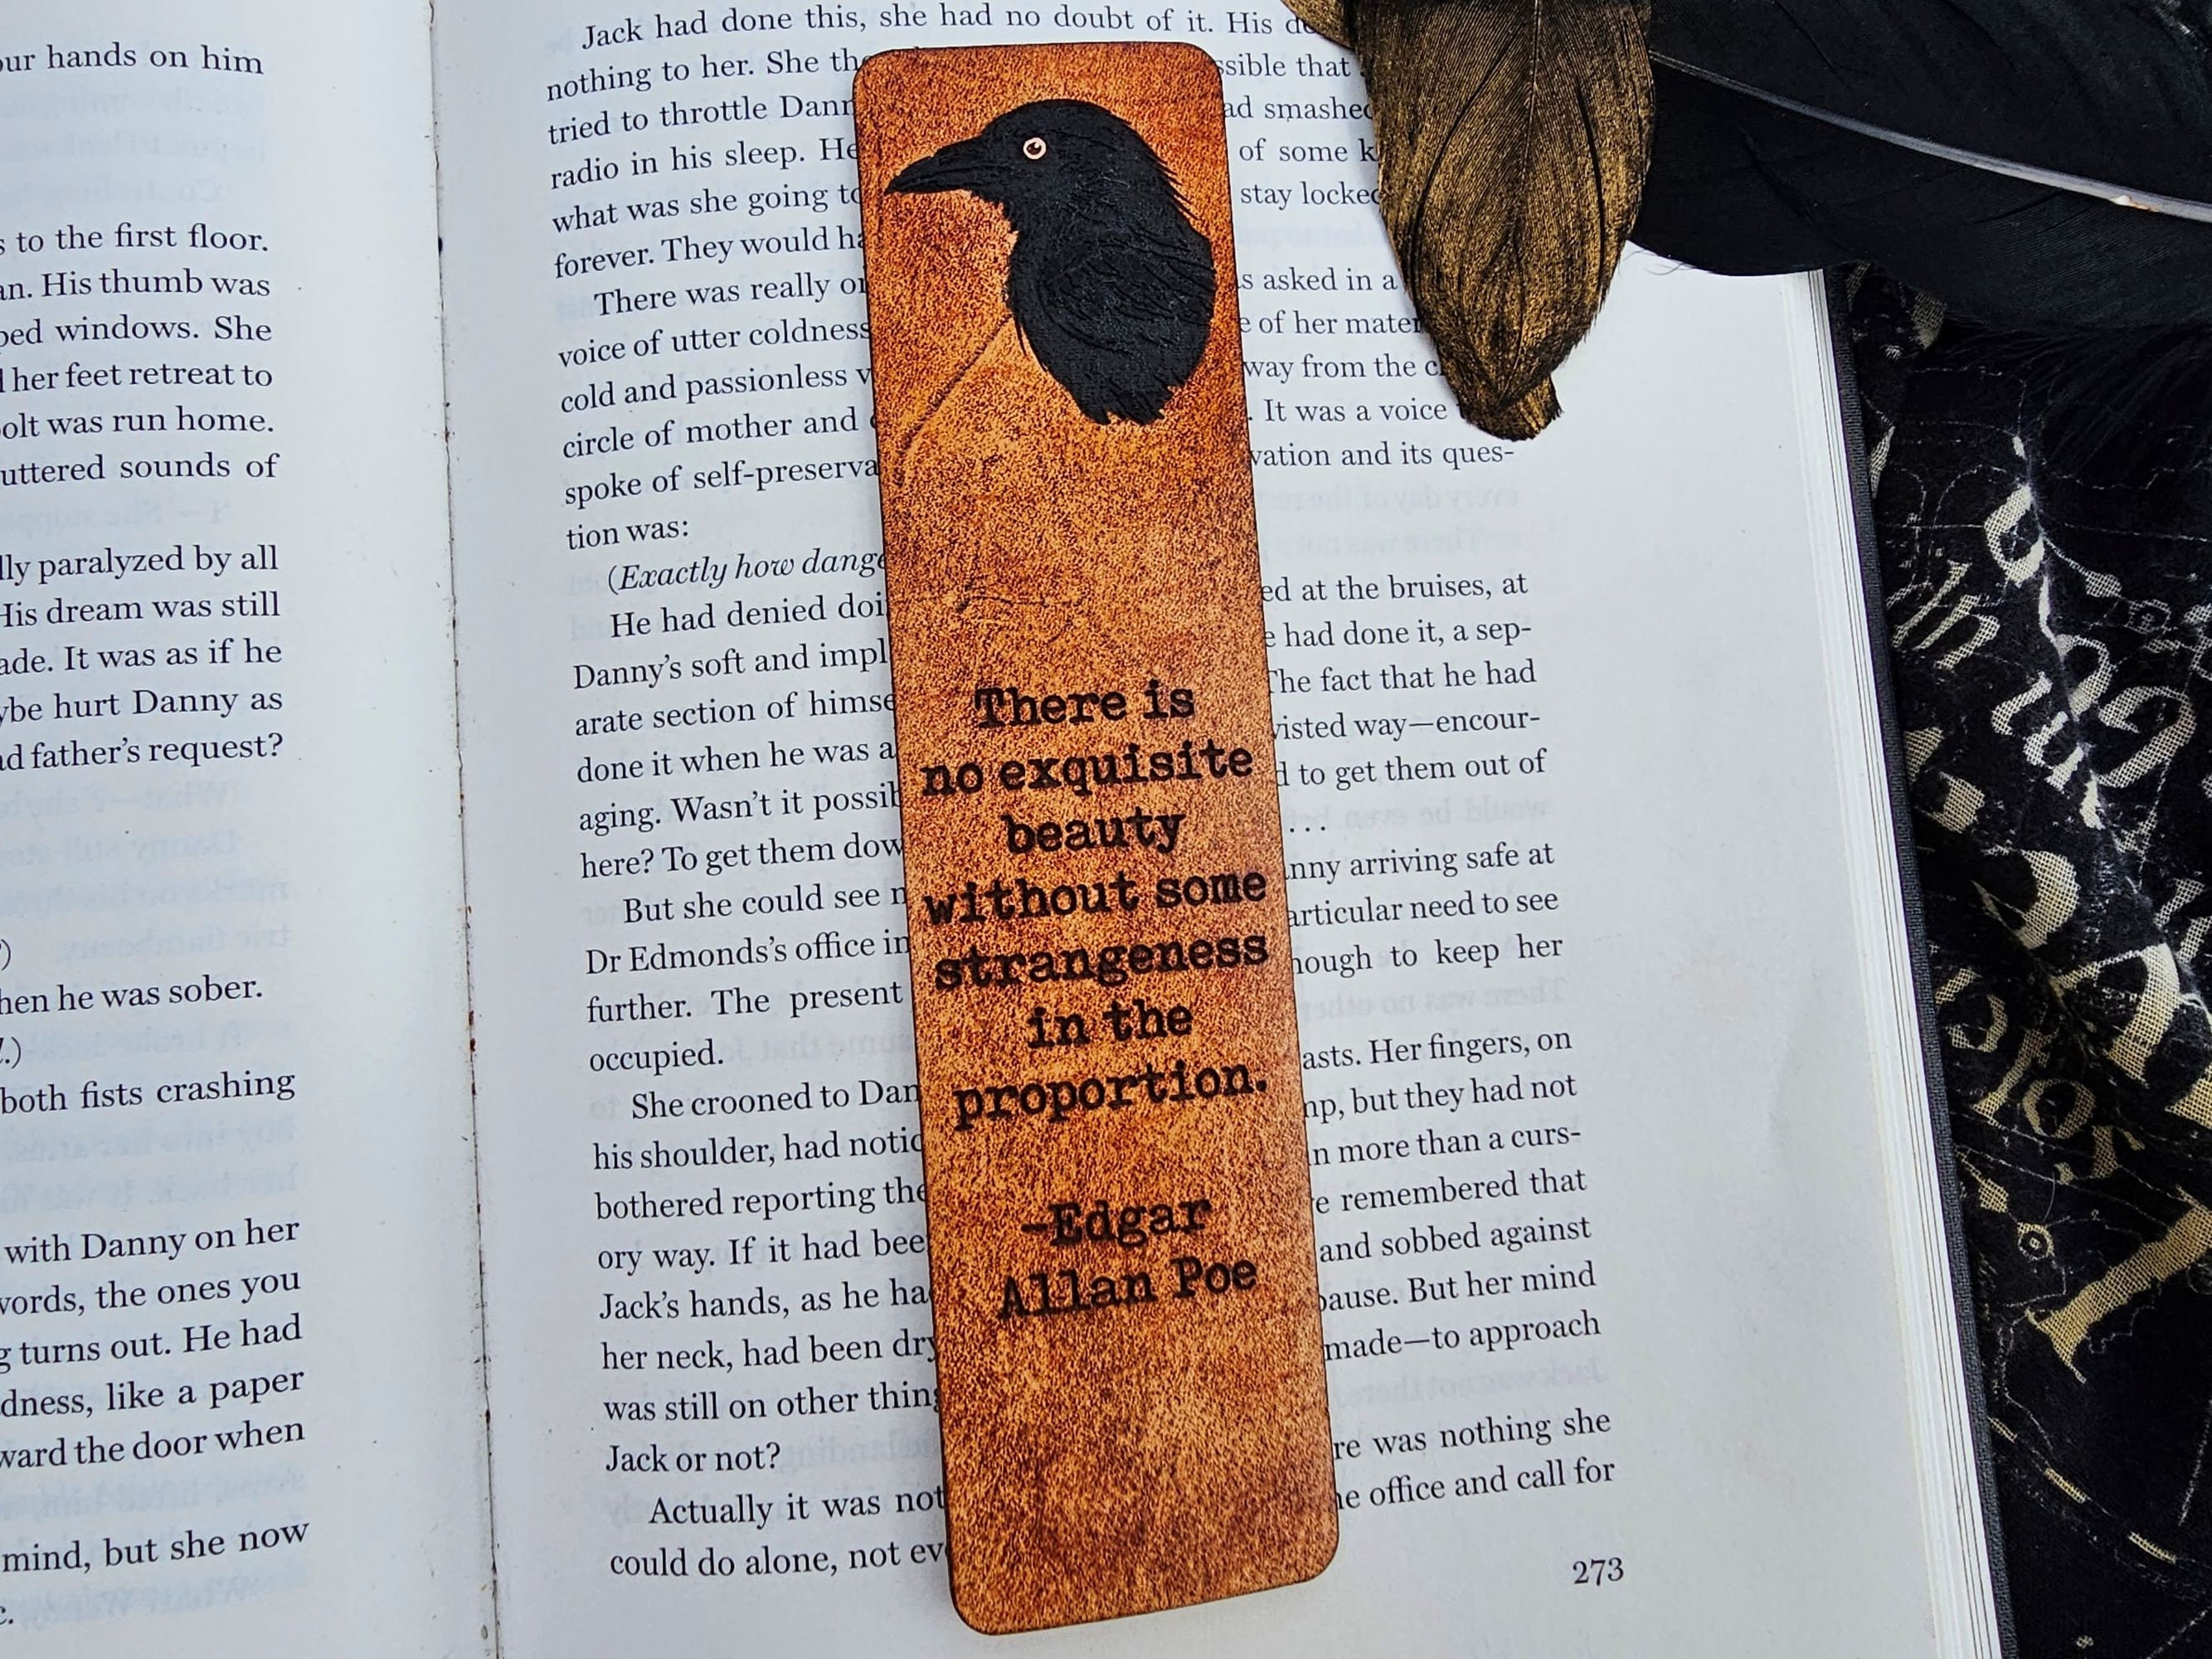  Cool Edgar Allan Poe Poetry Fridge Magnets Literary Macabre  Refrigerator or Locker Magnets Gift Set Emo Goth 5 Pack 1 Inch MP33-1 :  Handmade Products